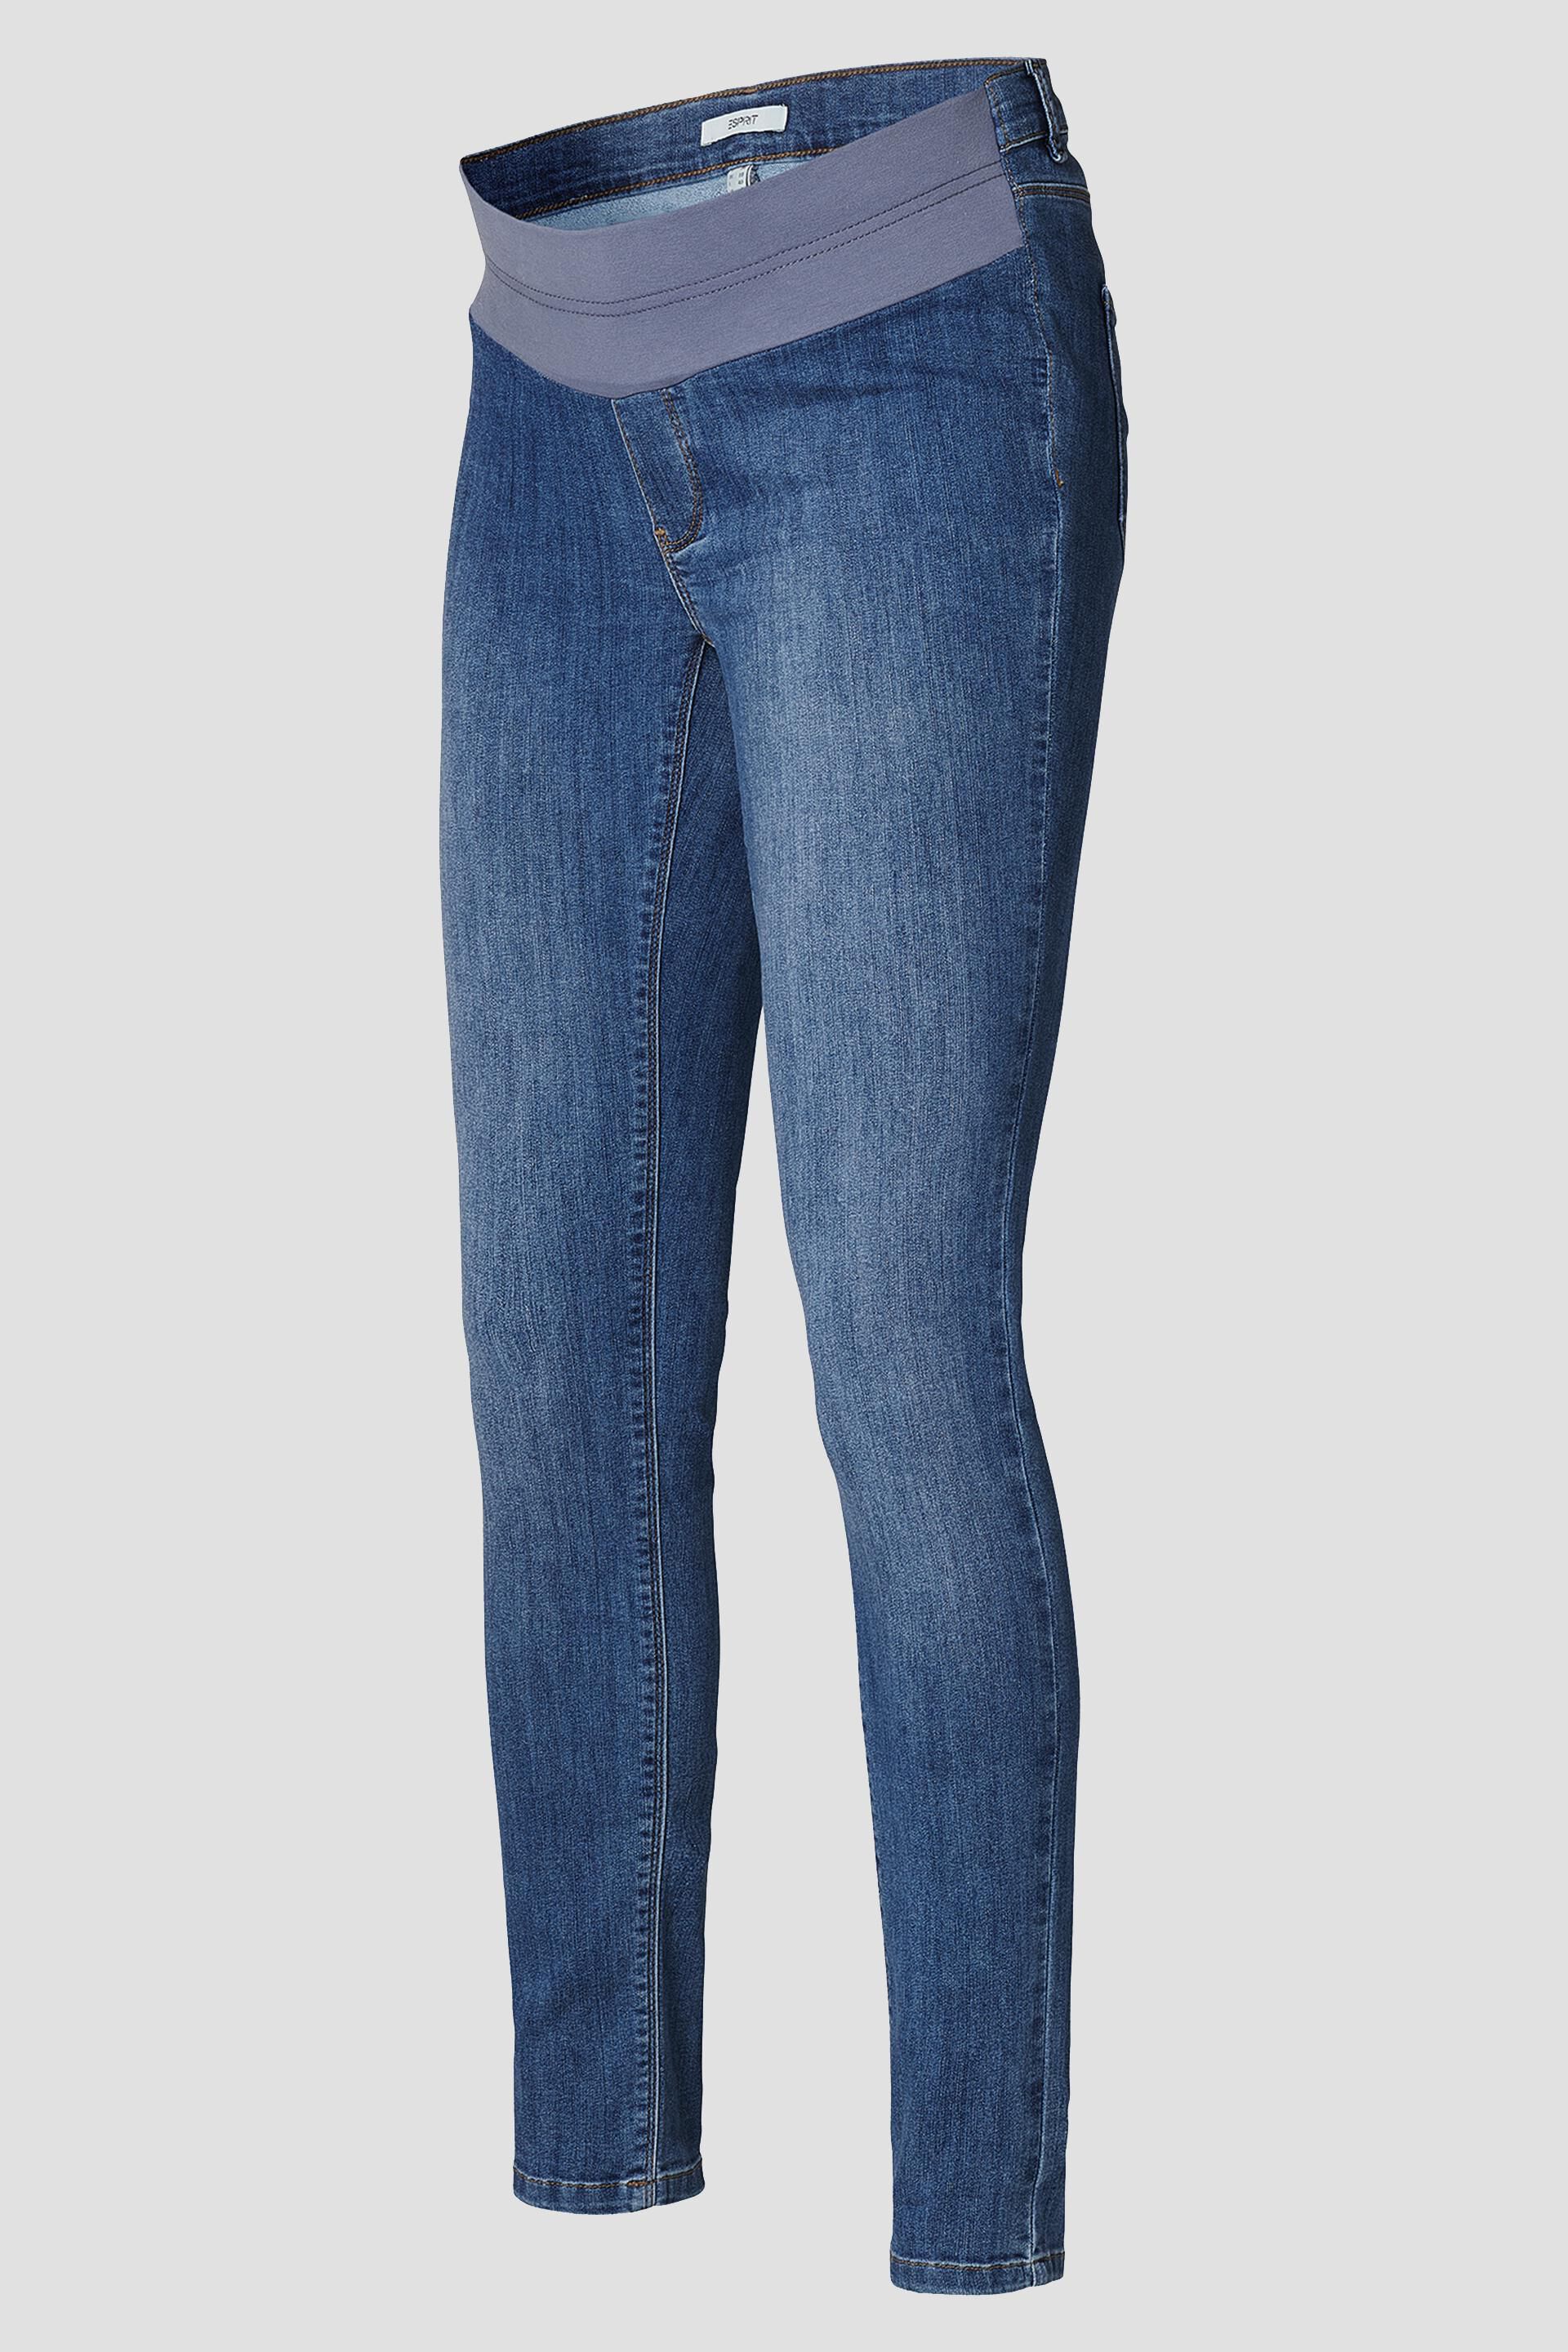 ESPRIT - Stretch jeggings with an under-bump waistband at our online shop